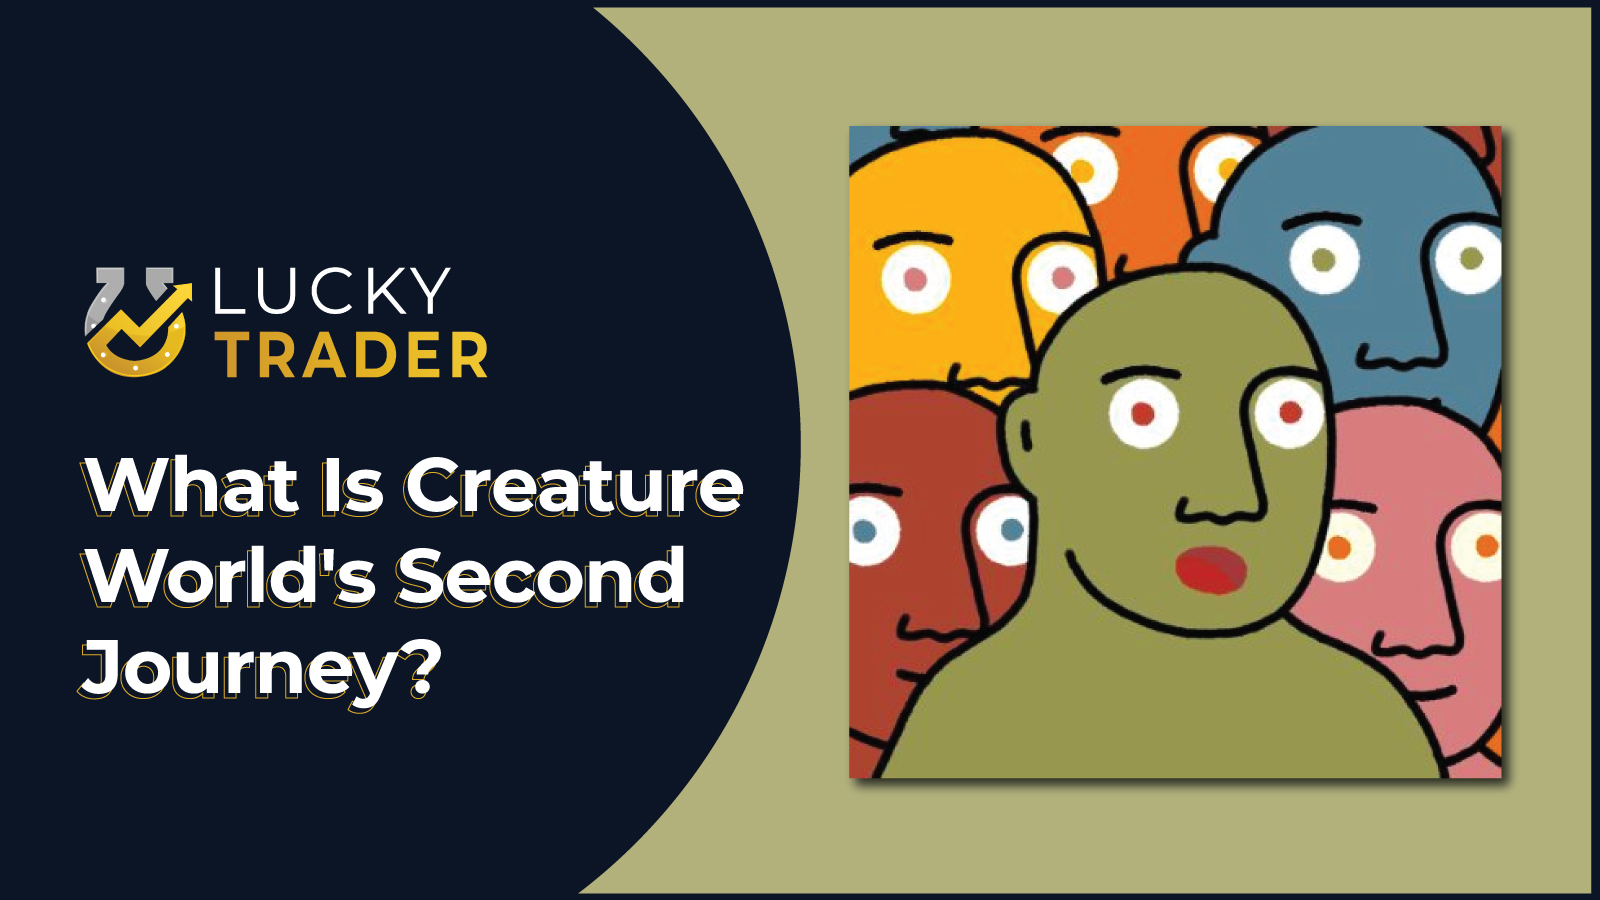 What Is Creature World's Second Journey?